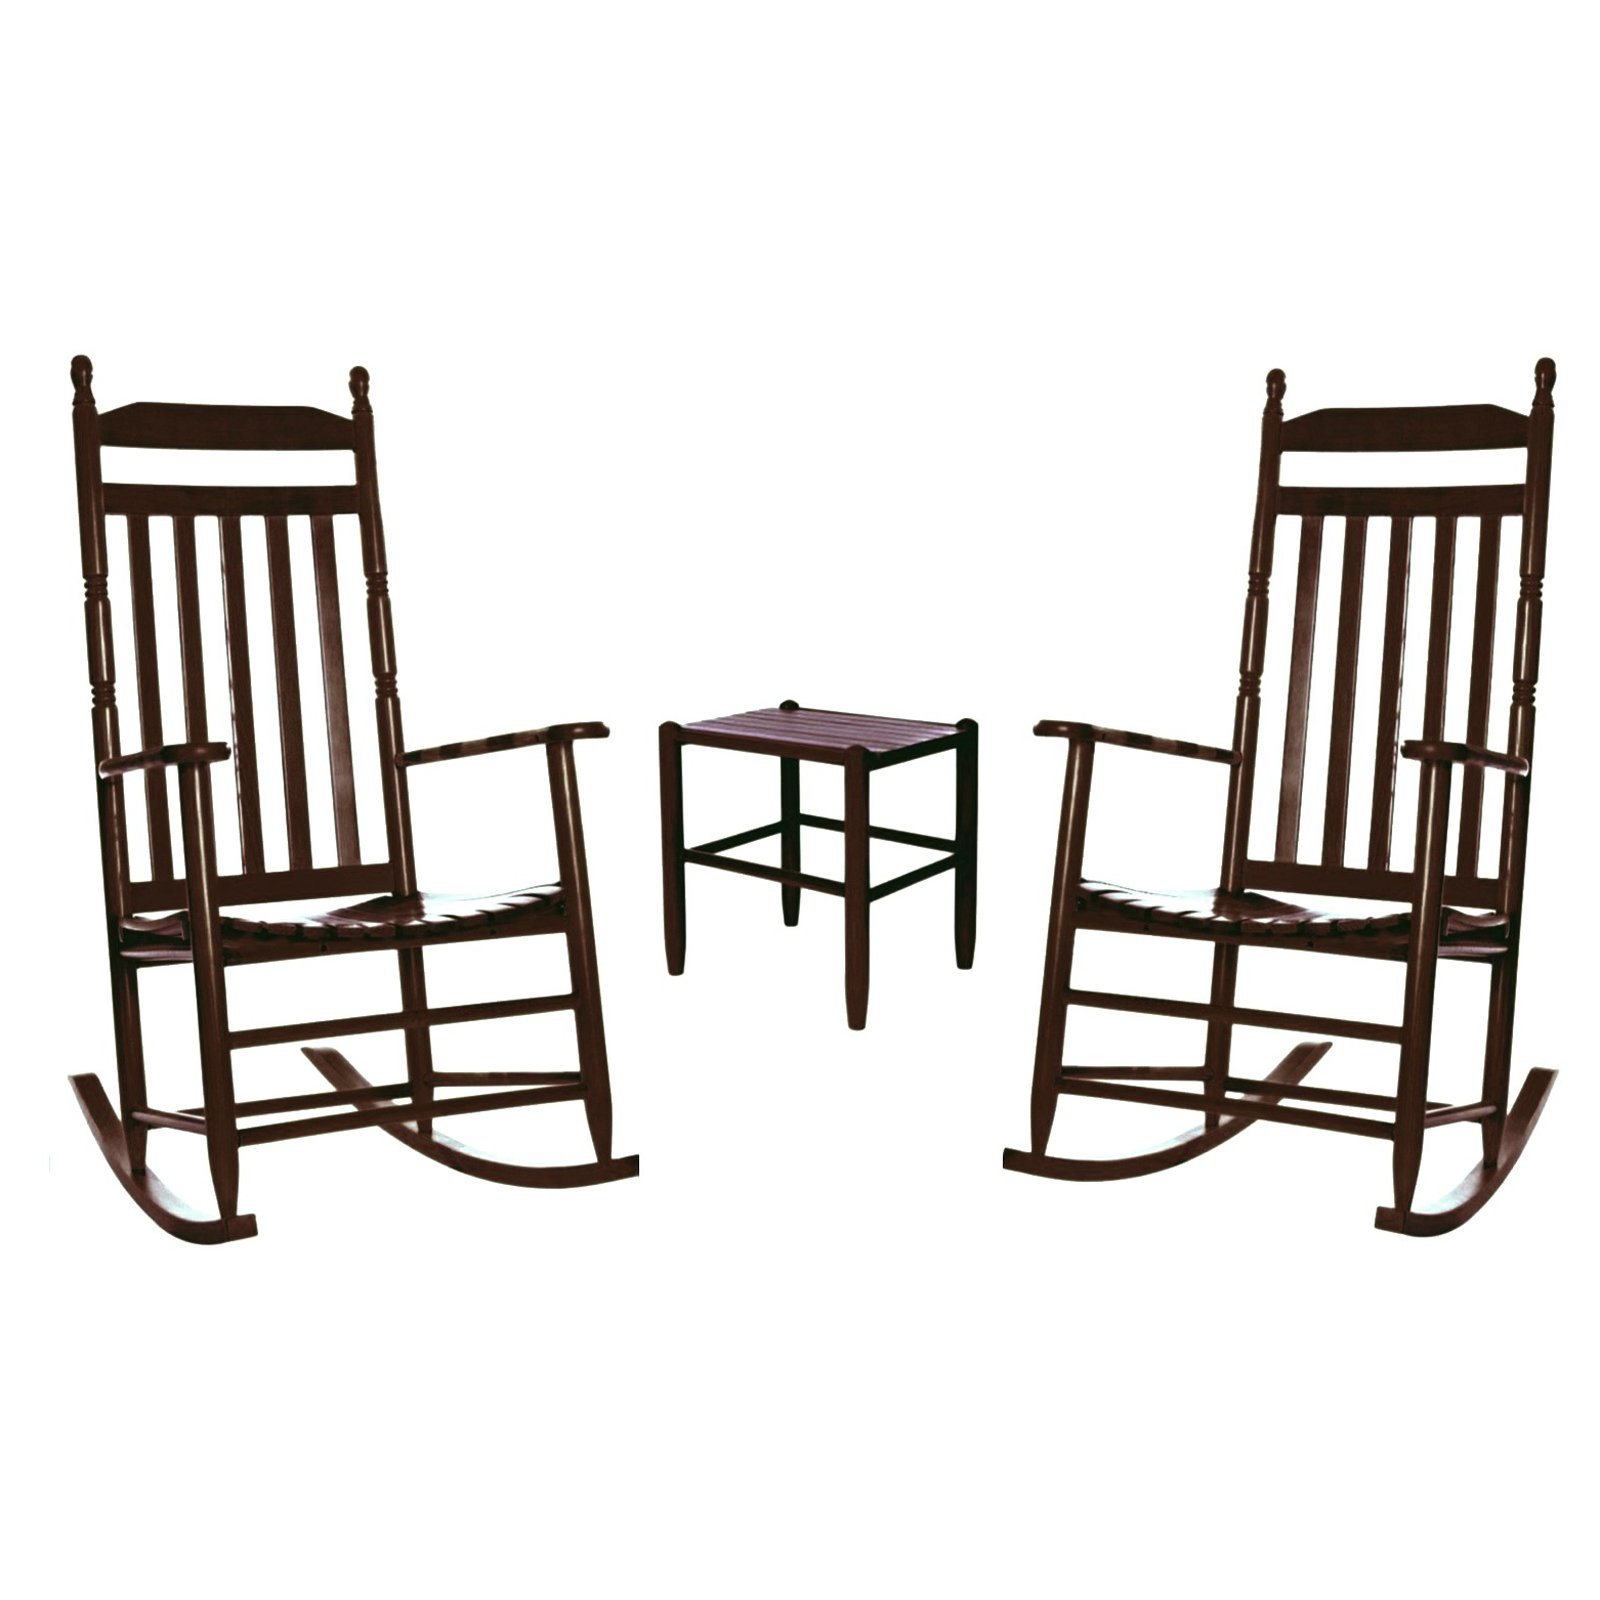 Dixie Seating Calabash 3 Piece Rocking Chair Set with Side Table - image 1 of 5